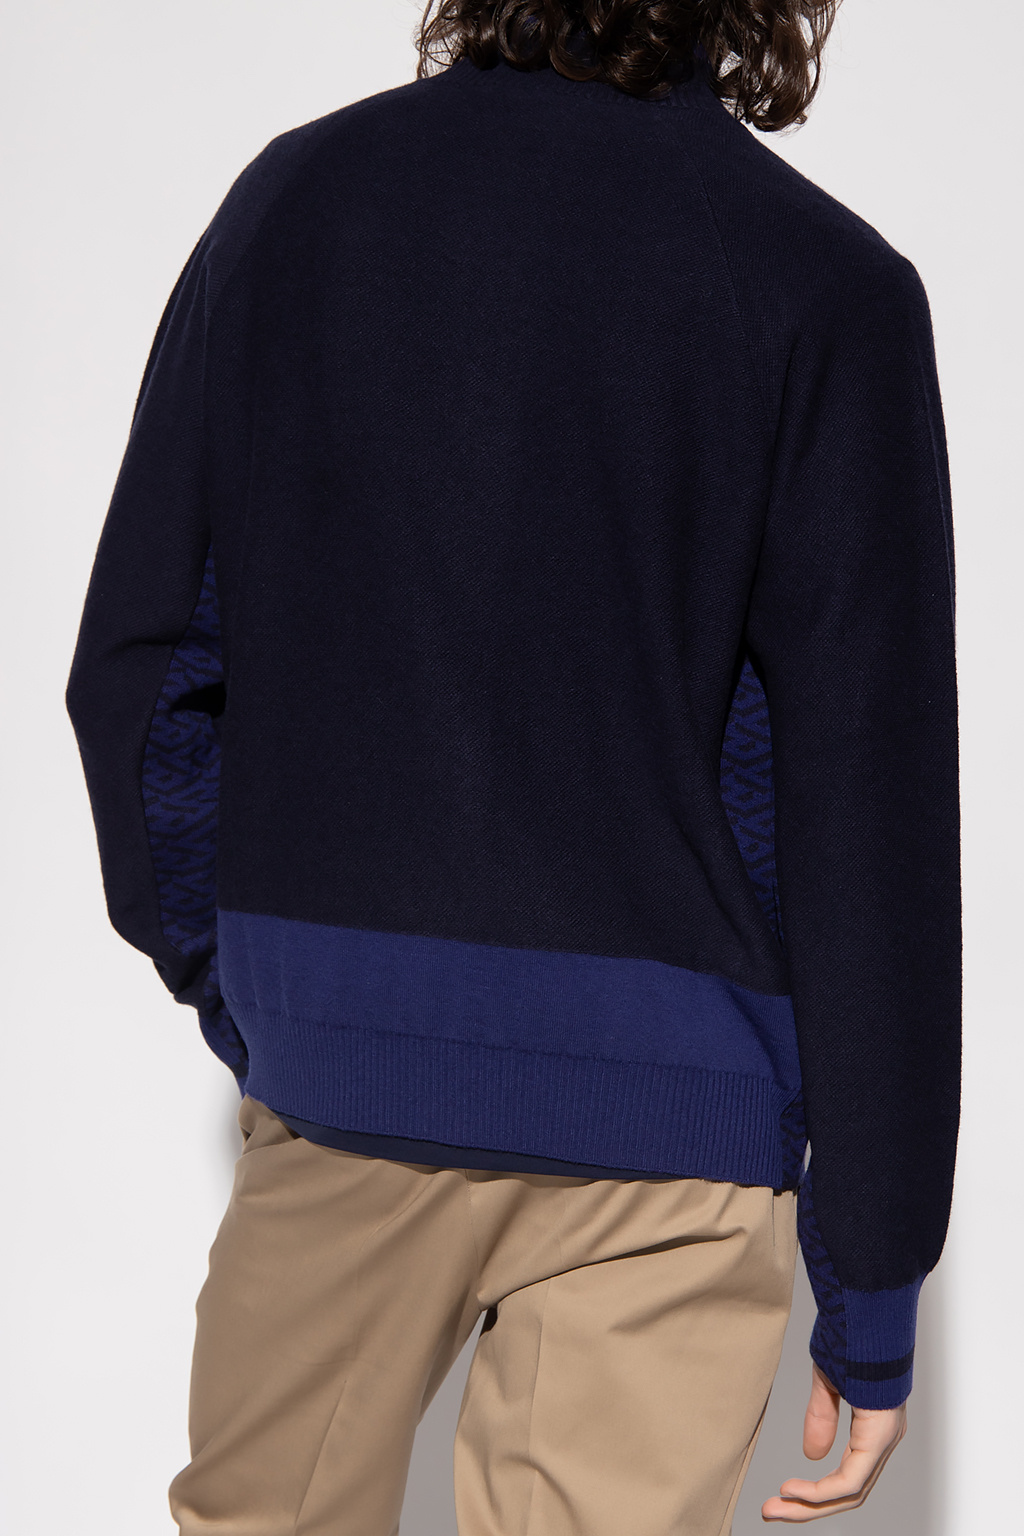 Versace Light Blue Cashmere And Wool Sweater With Logo Print